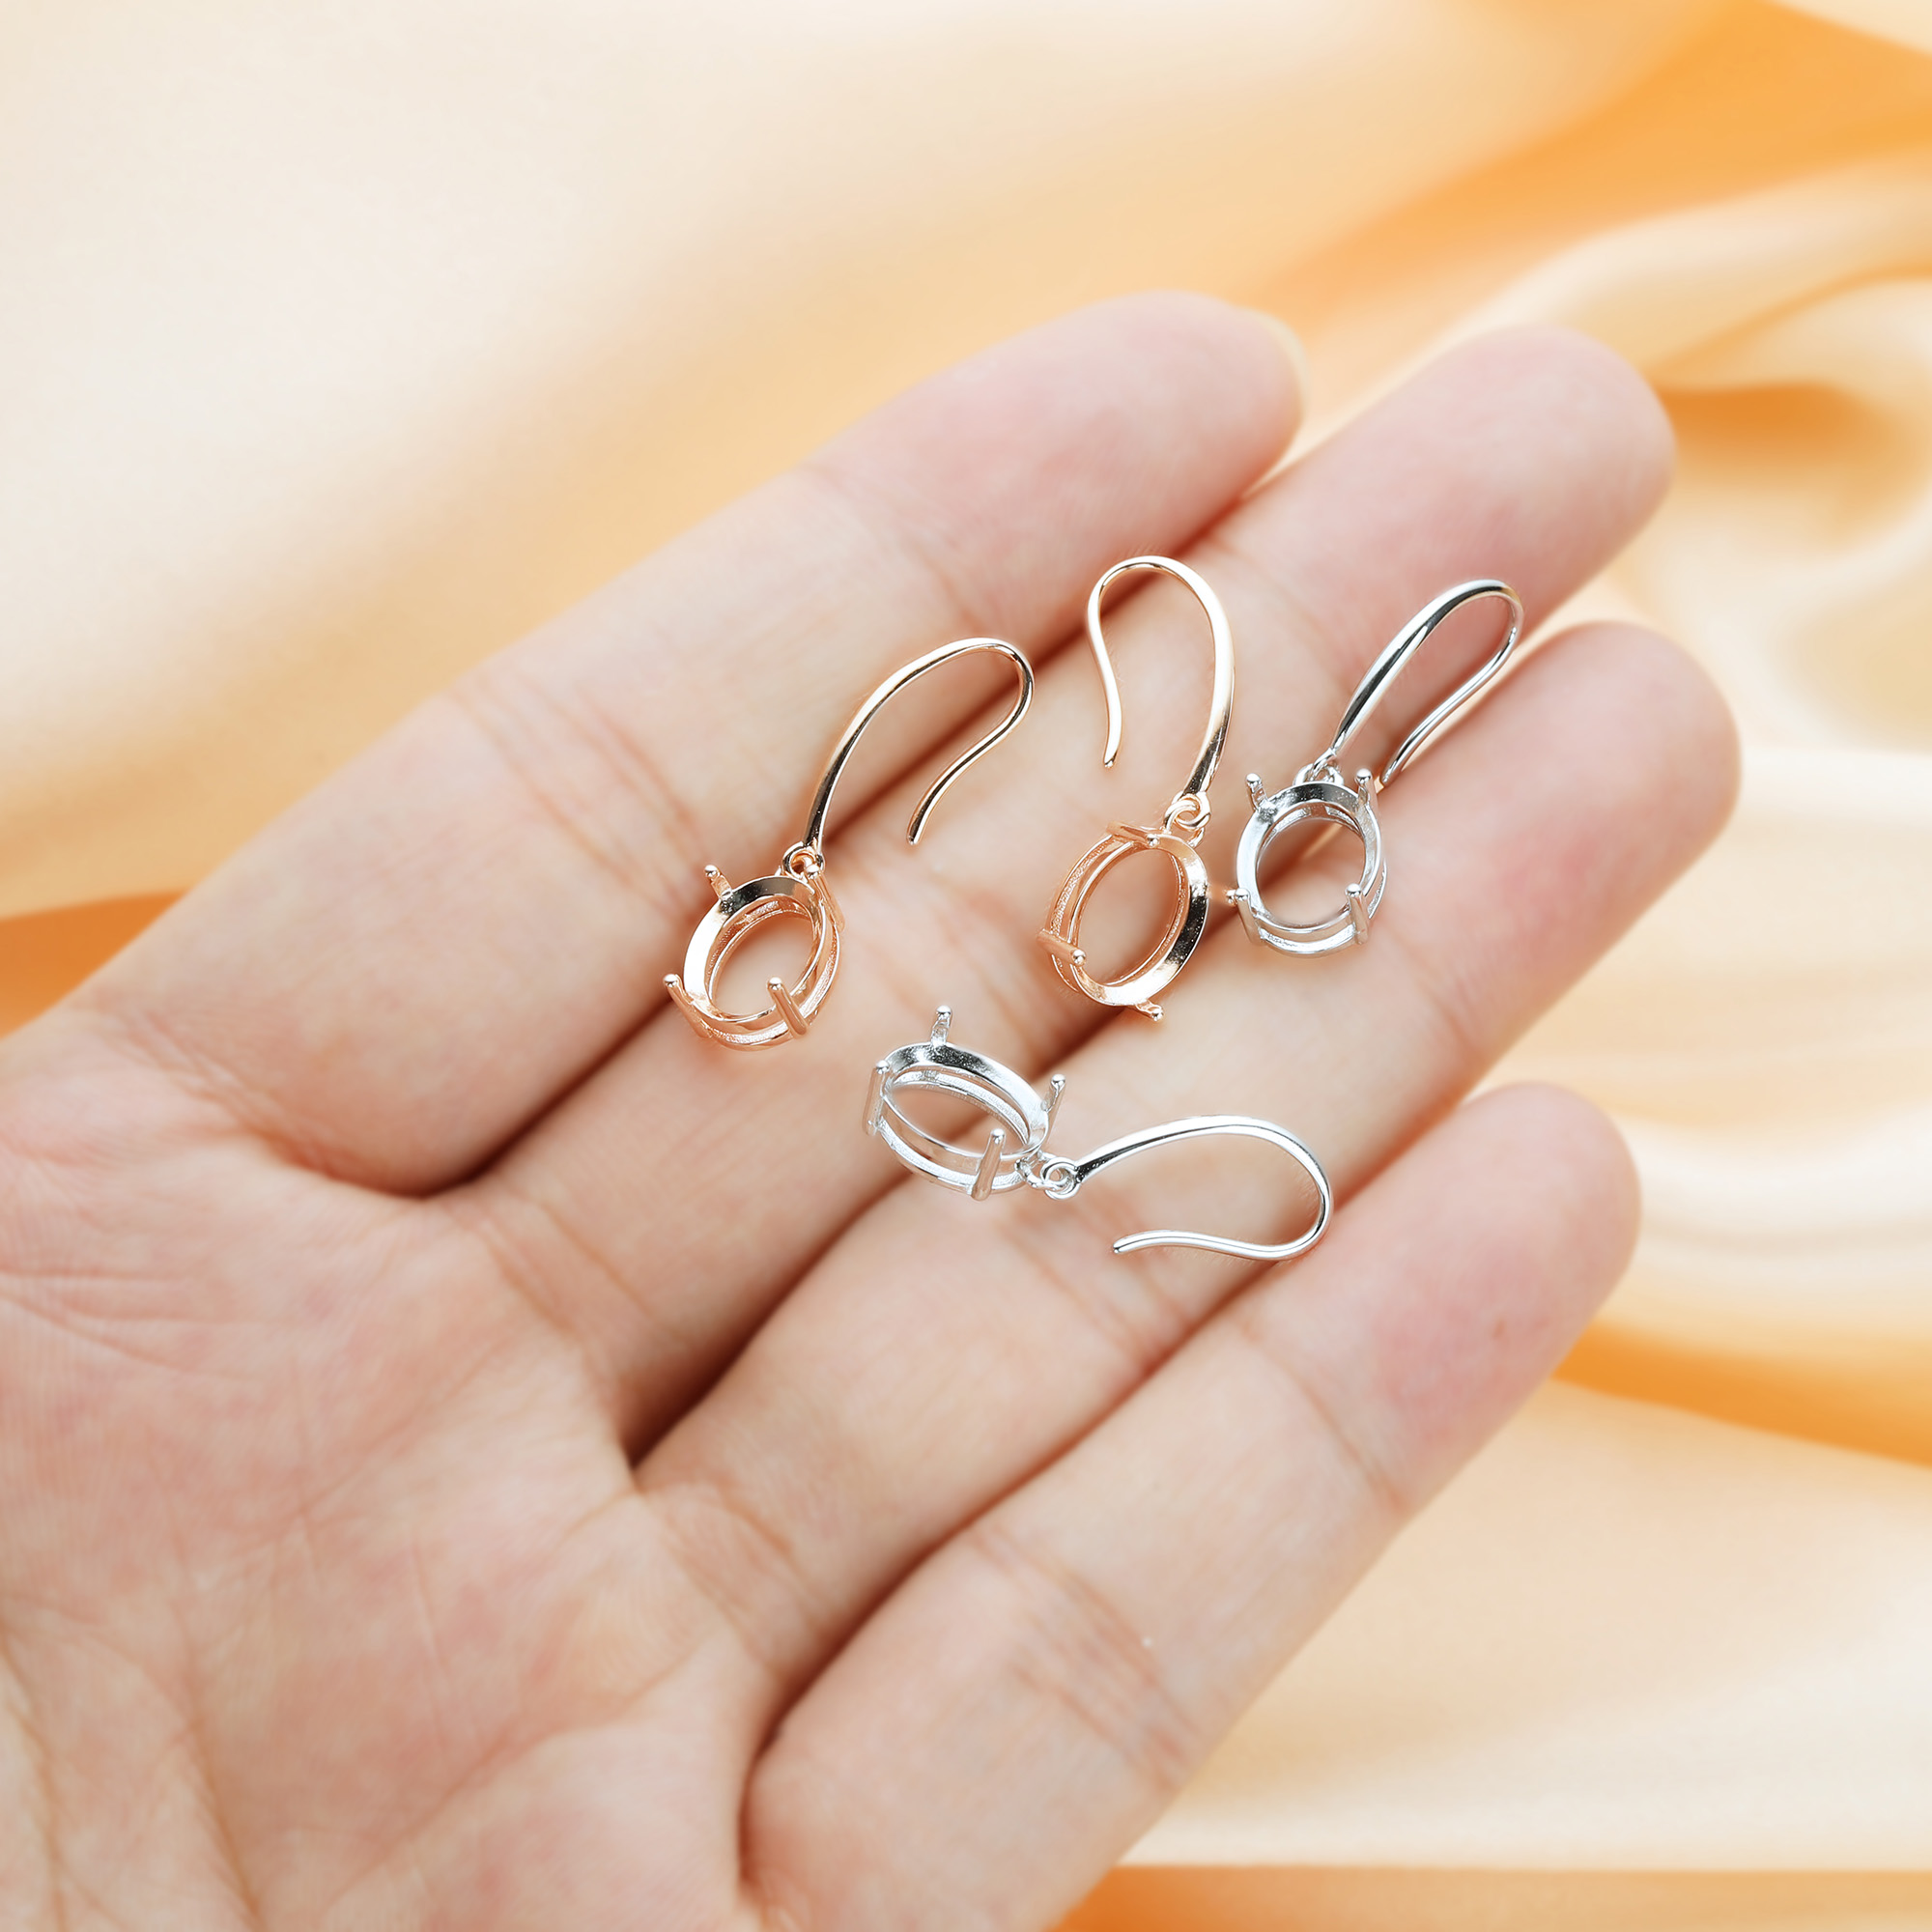 8x10MM Oval Prong Hooks Earrings Settings,Solid 925 Sterling Silver Rose Gold Plated Earrings,Simple Earring,DIY Earrings Bezel 1706123 - Click Image to Close